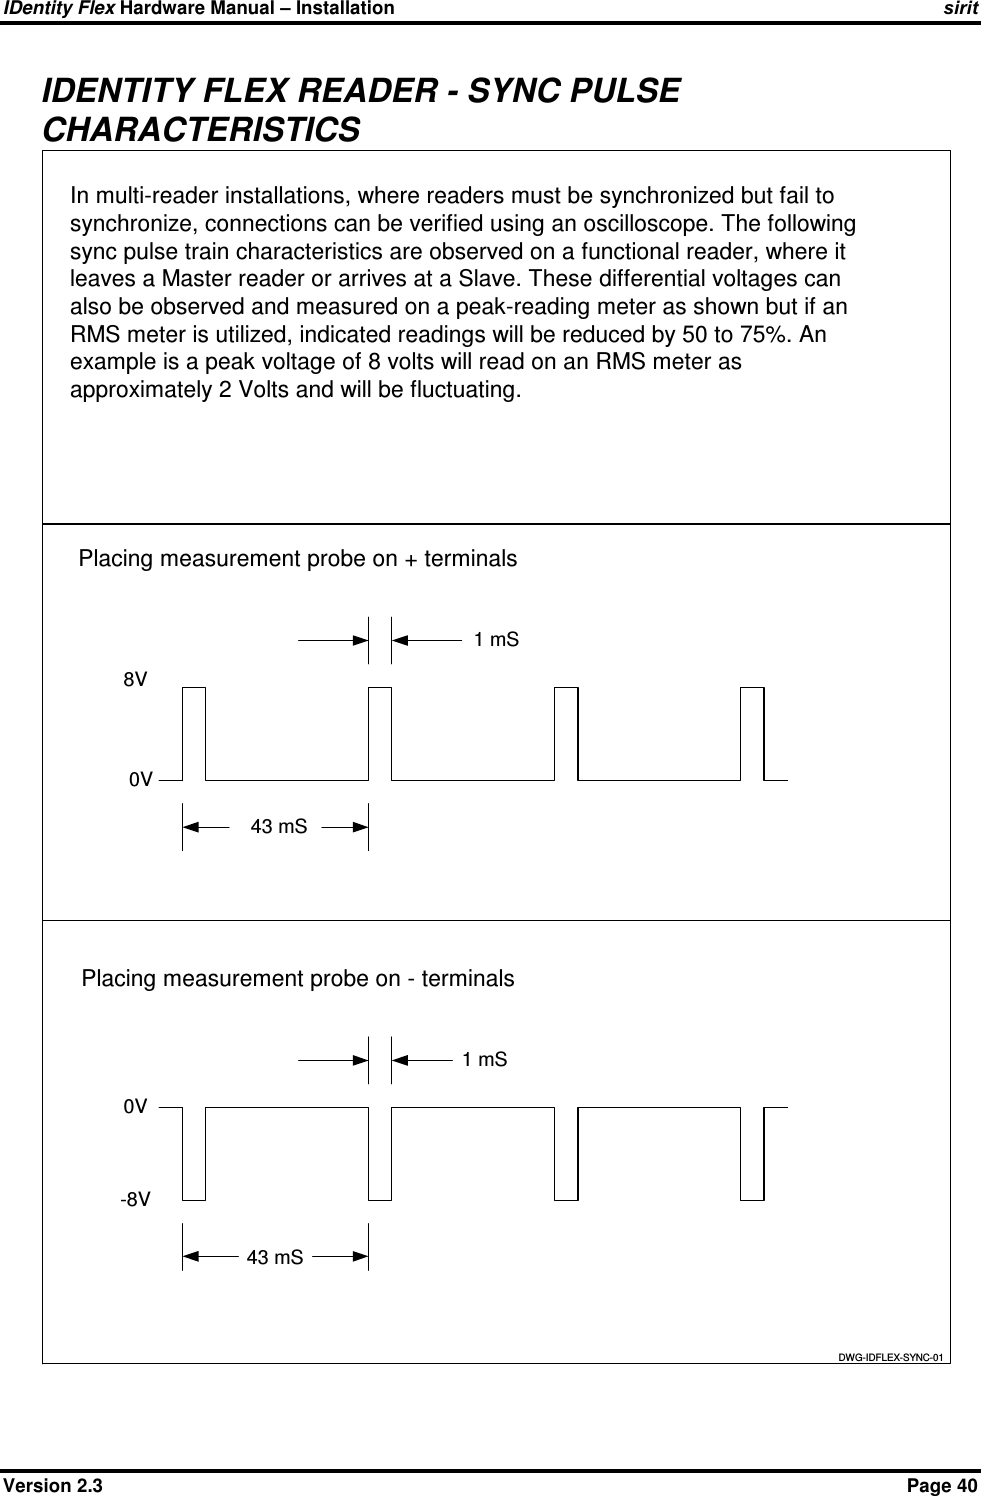 IDentity Flex Hardware Manual – Installation   sirit Version 2.3    Page 40 IDENTITY FLEX READER - SYNC PULSE CHARACTERISTICSIn multi-reader installations, where readers must be synchronized but fail tosynchronize, connections can be verified using an oscilloscope. The followingsync pulse train characteristics are observed on a functional reader, where itleaves a Master reader or arrives at a Slave. These differential voltages canalso be observed and measured on a peak-reading meter as shown but if anRMS meter is utilized, indicated readings will be reduced by 50 to 75%. Anexample is a peak voltage of 8 volts will read on an RMS meter asapproximately 2 Volts and will be fluctuating.Placing measurement probe on + terminals0V8V43 mS1 mSPlacing measurement probe on - terminals0V-8V43 mS1 mSDWG-IDFLEX-SYNC-01 